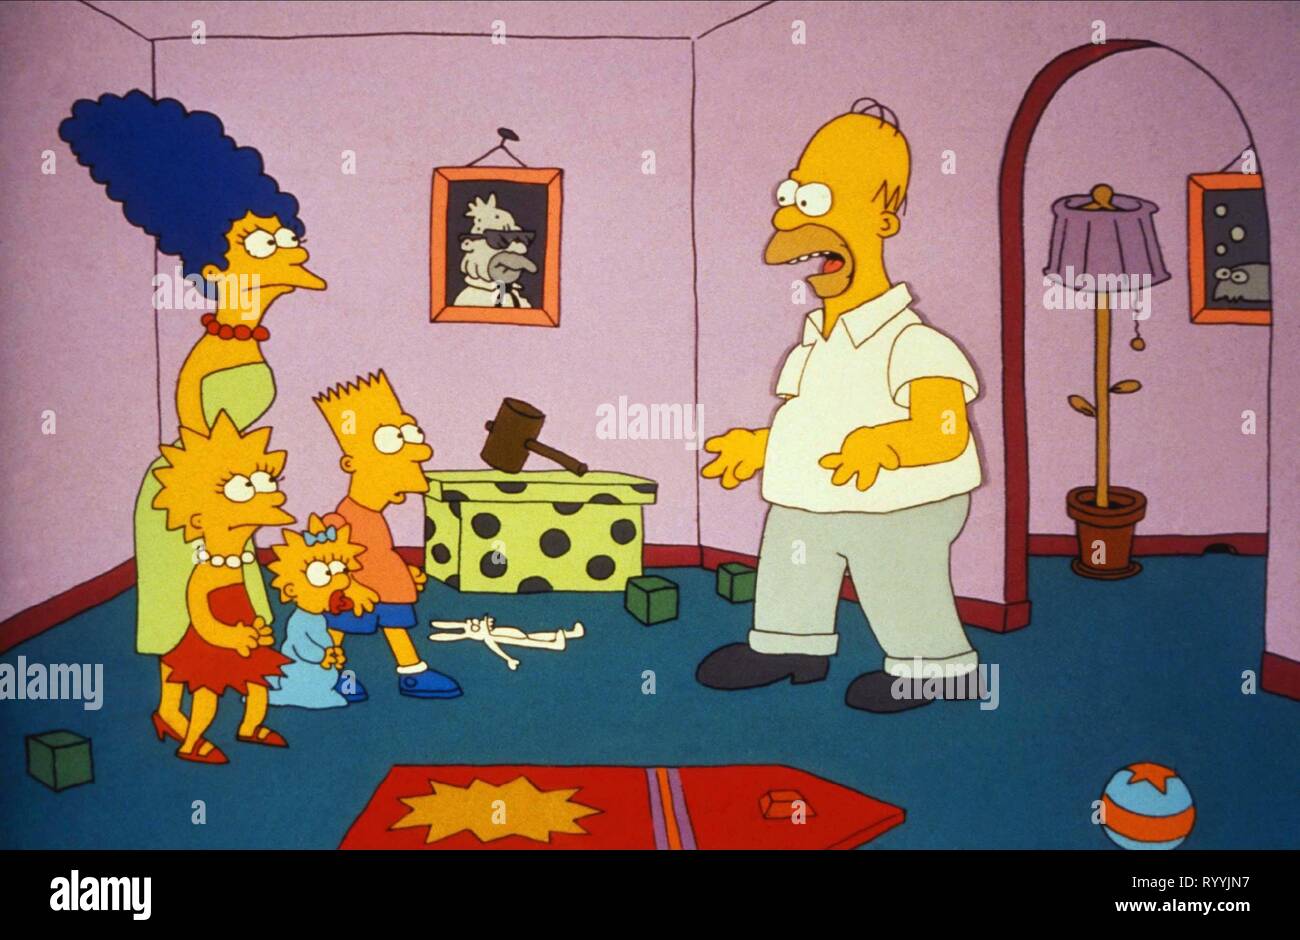 LISA, MARGE, MAGGIE, BART,HOMER SIMPSON, THE SIMPSONS, 1989 Stock Photo -  Alamy